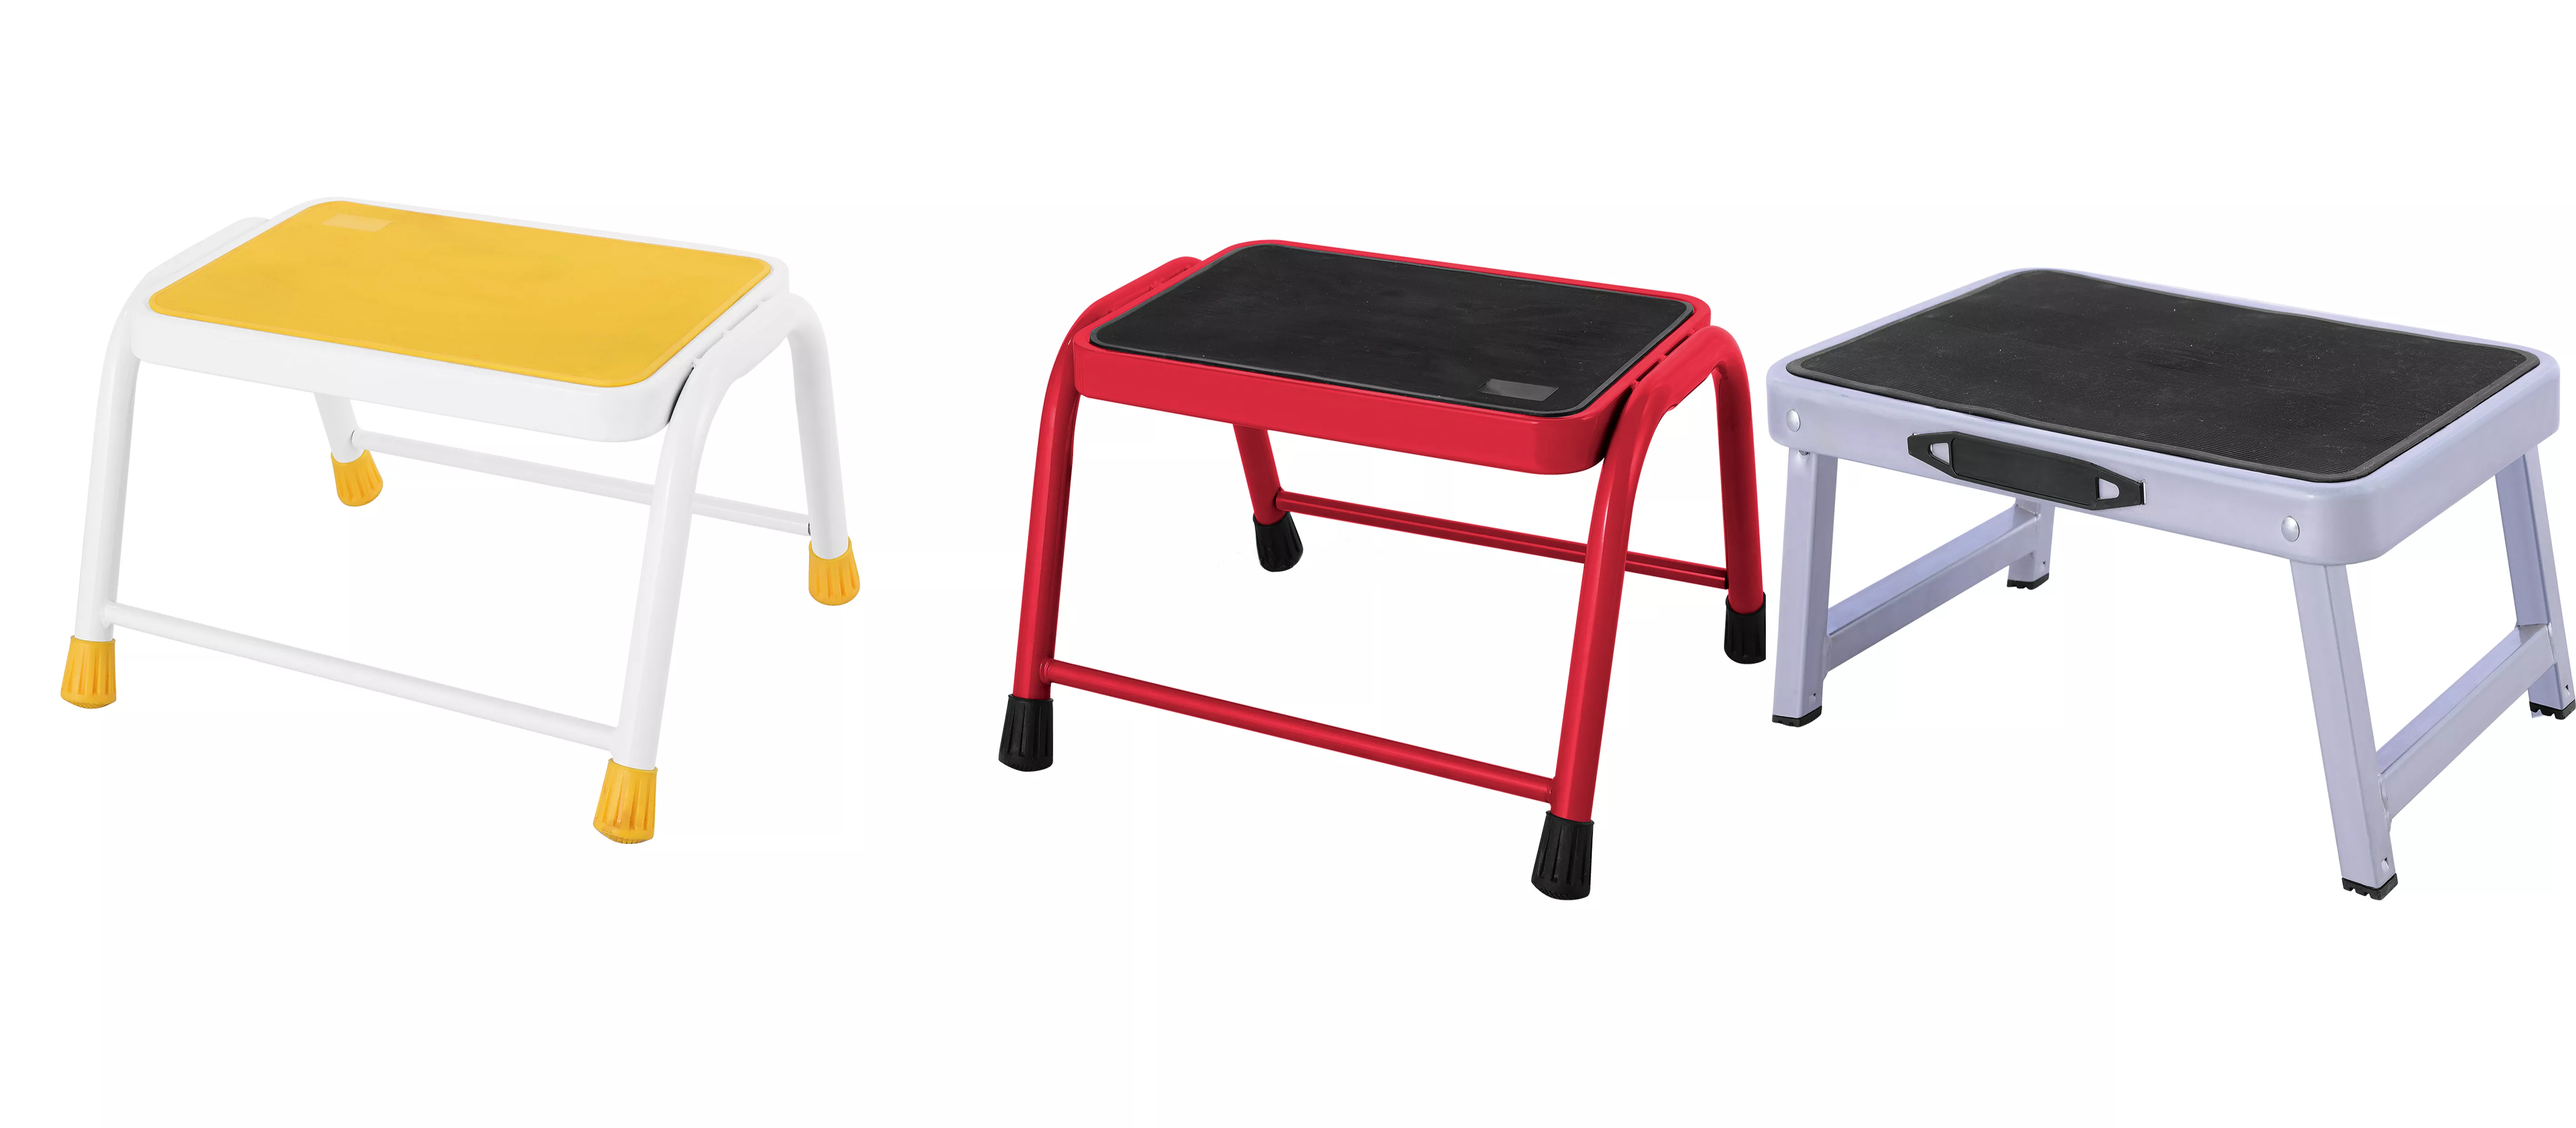 Home portable step stool foldable metal stool step thickened indoor larger step stool